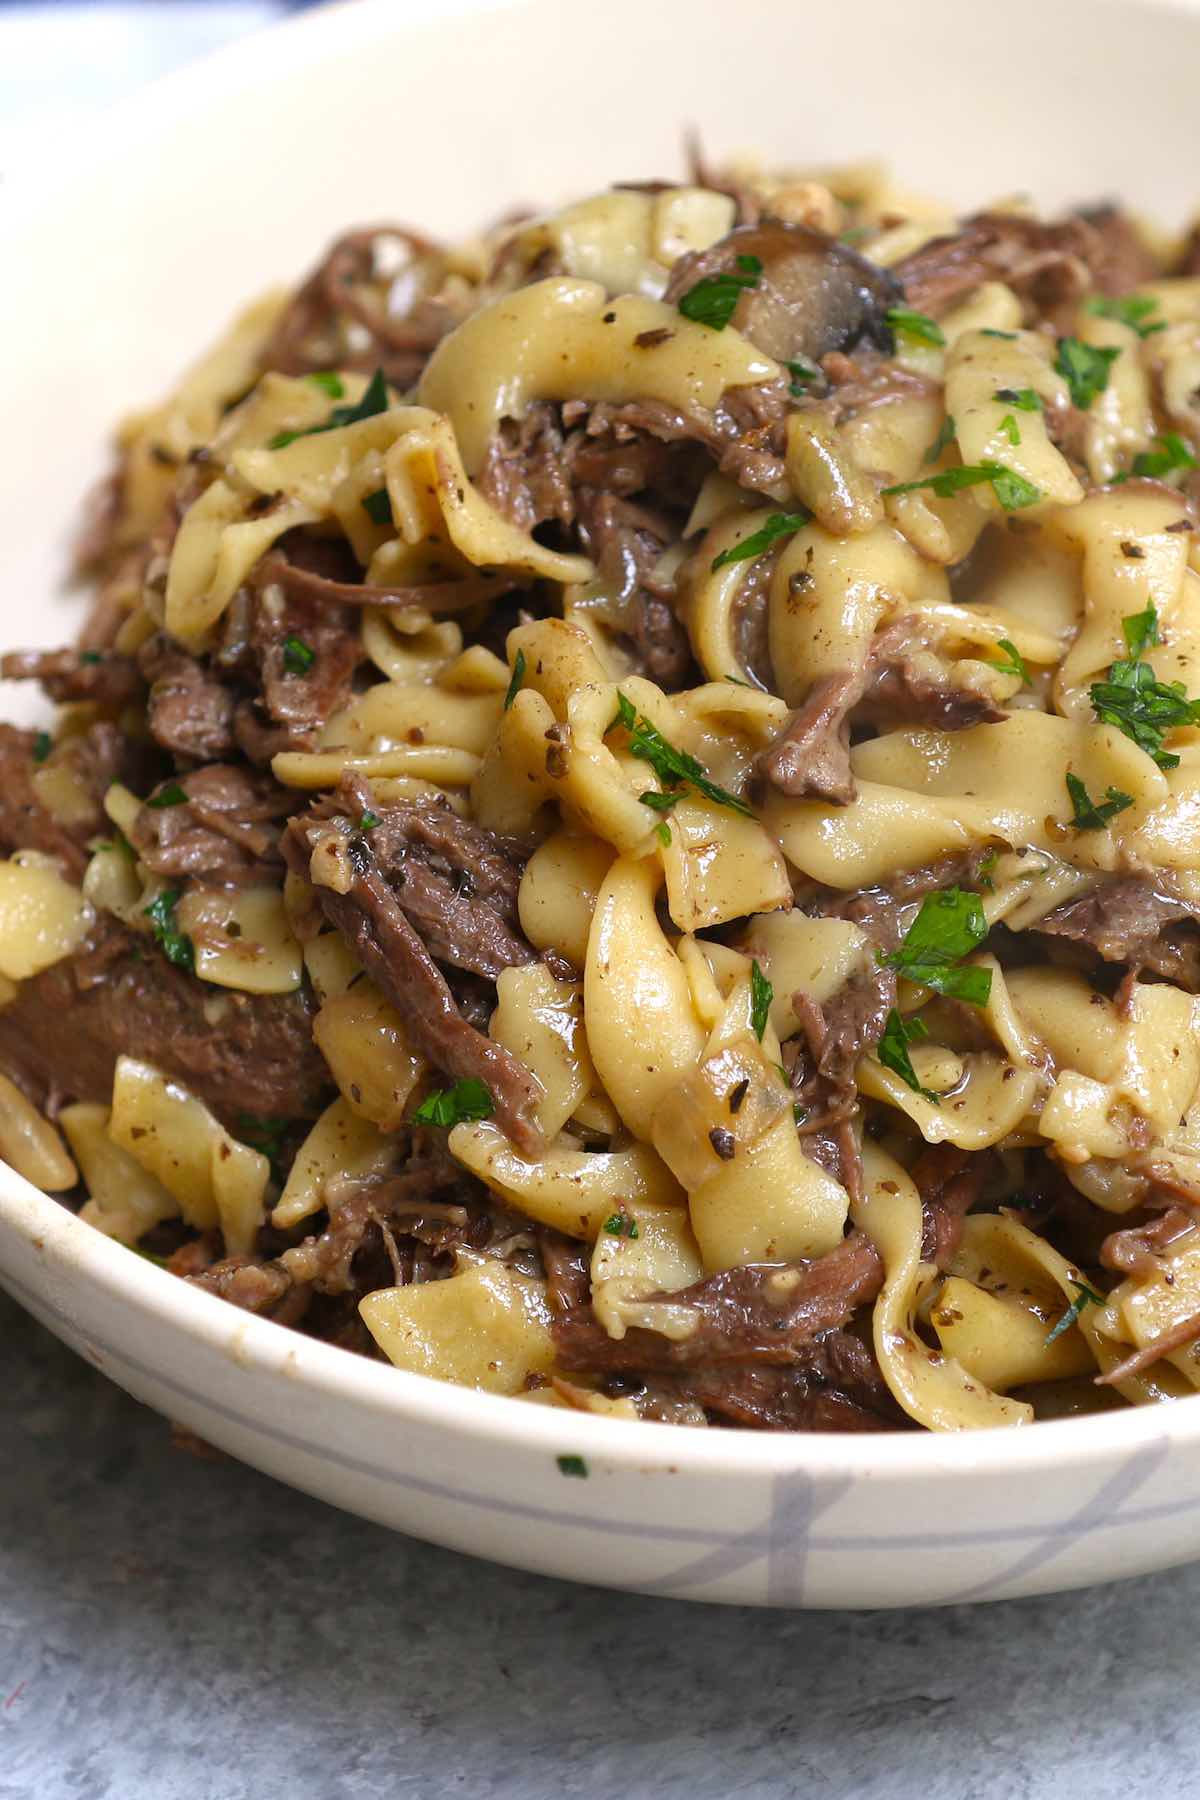 A large serving of beef and noodles in a bowl